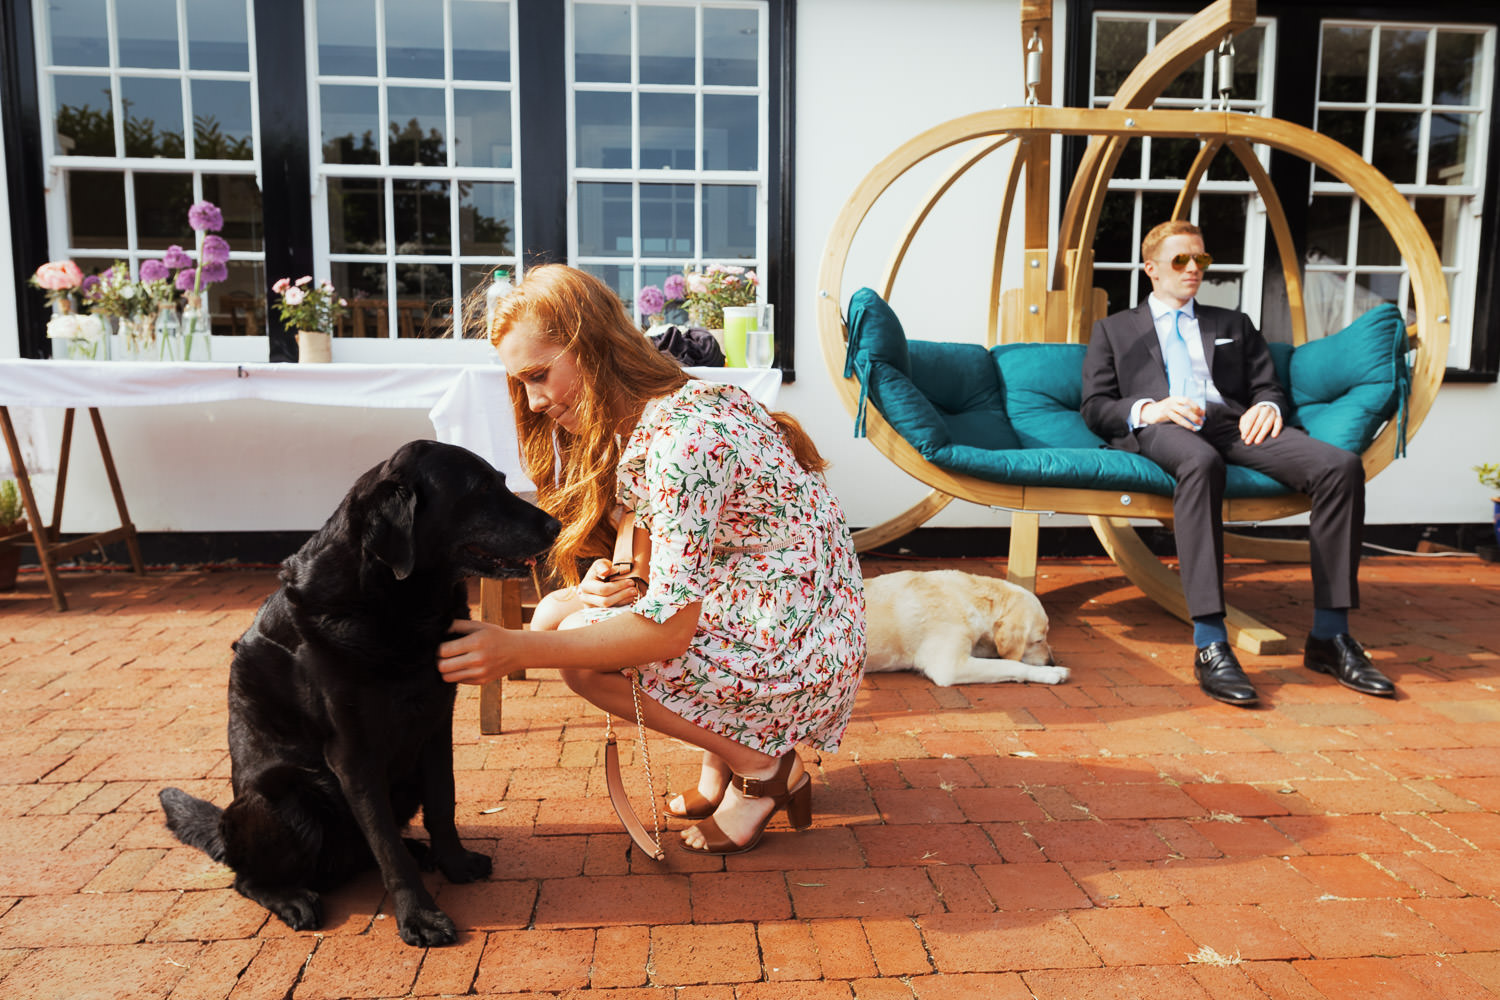 A woman in a floral dress petting a dog at a wedding.